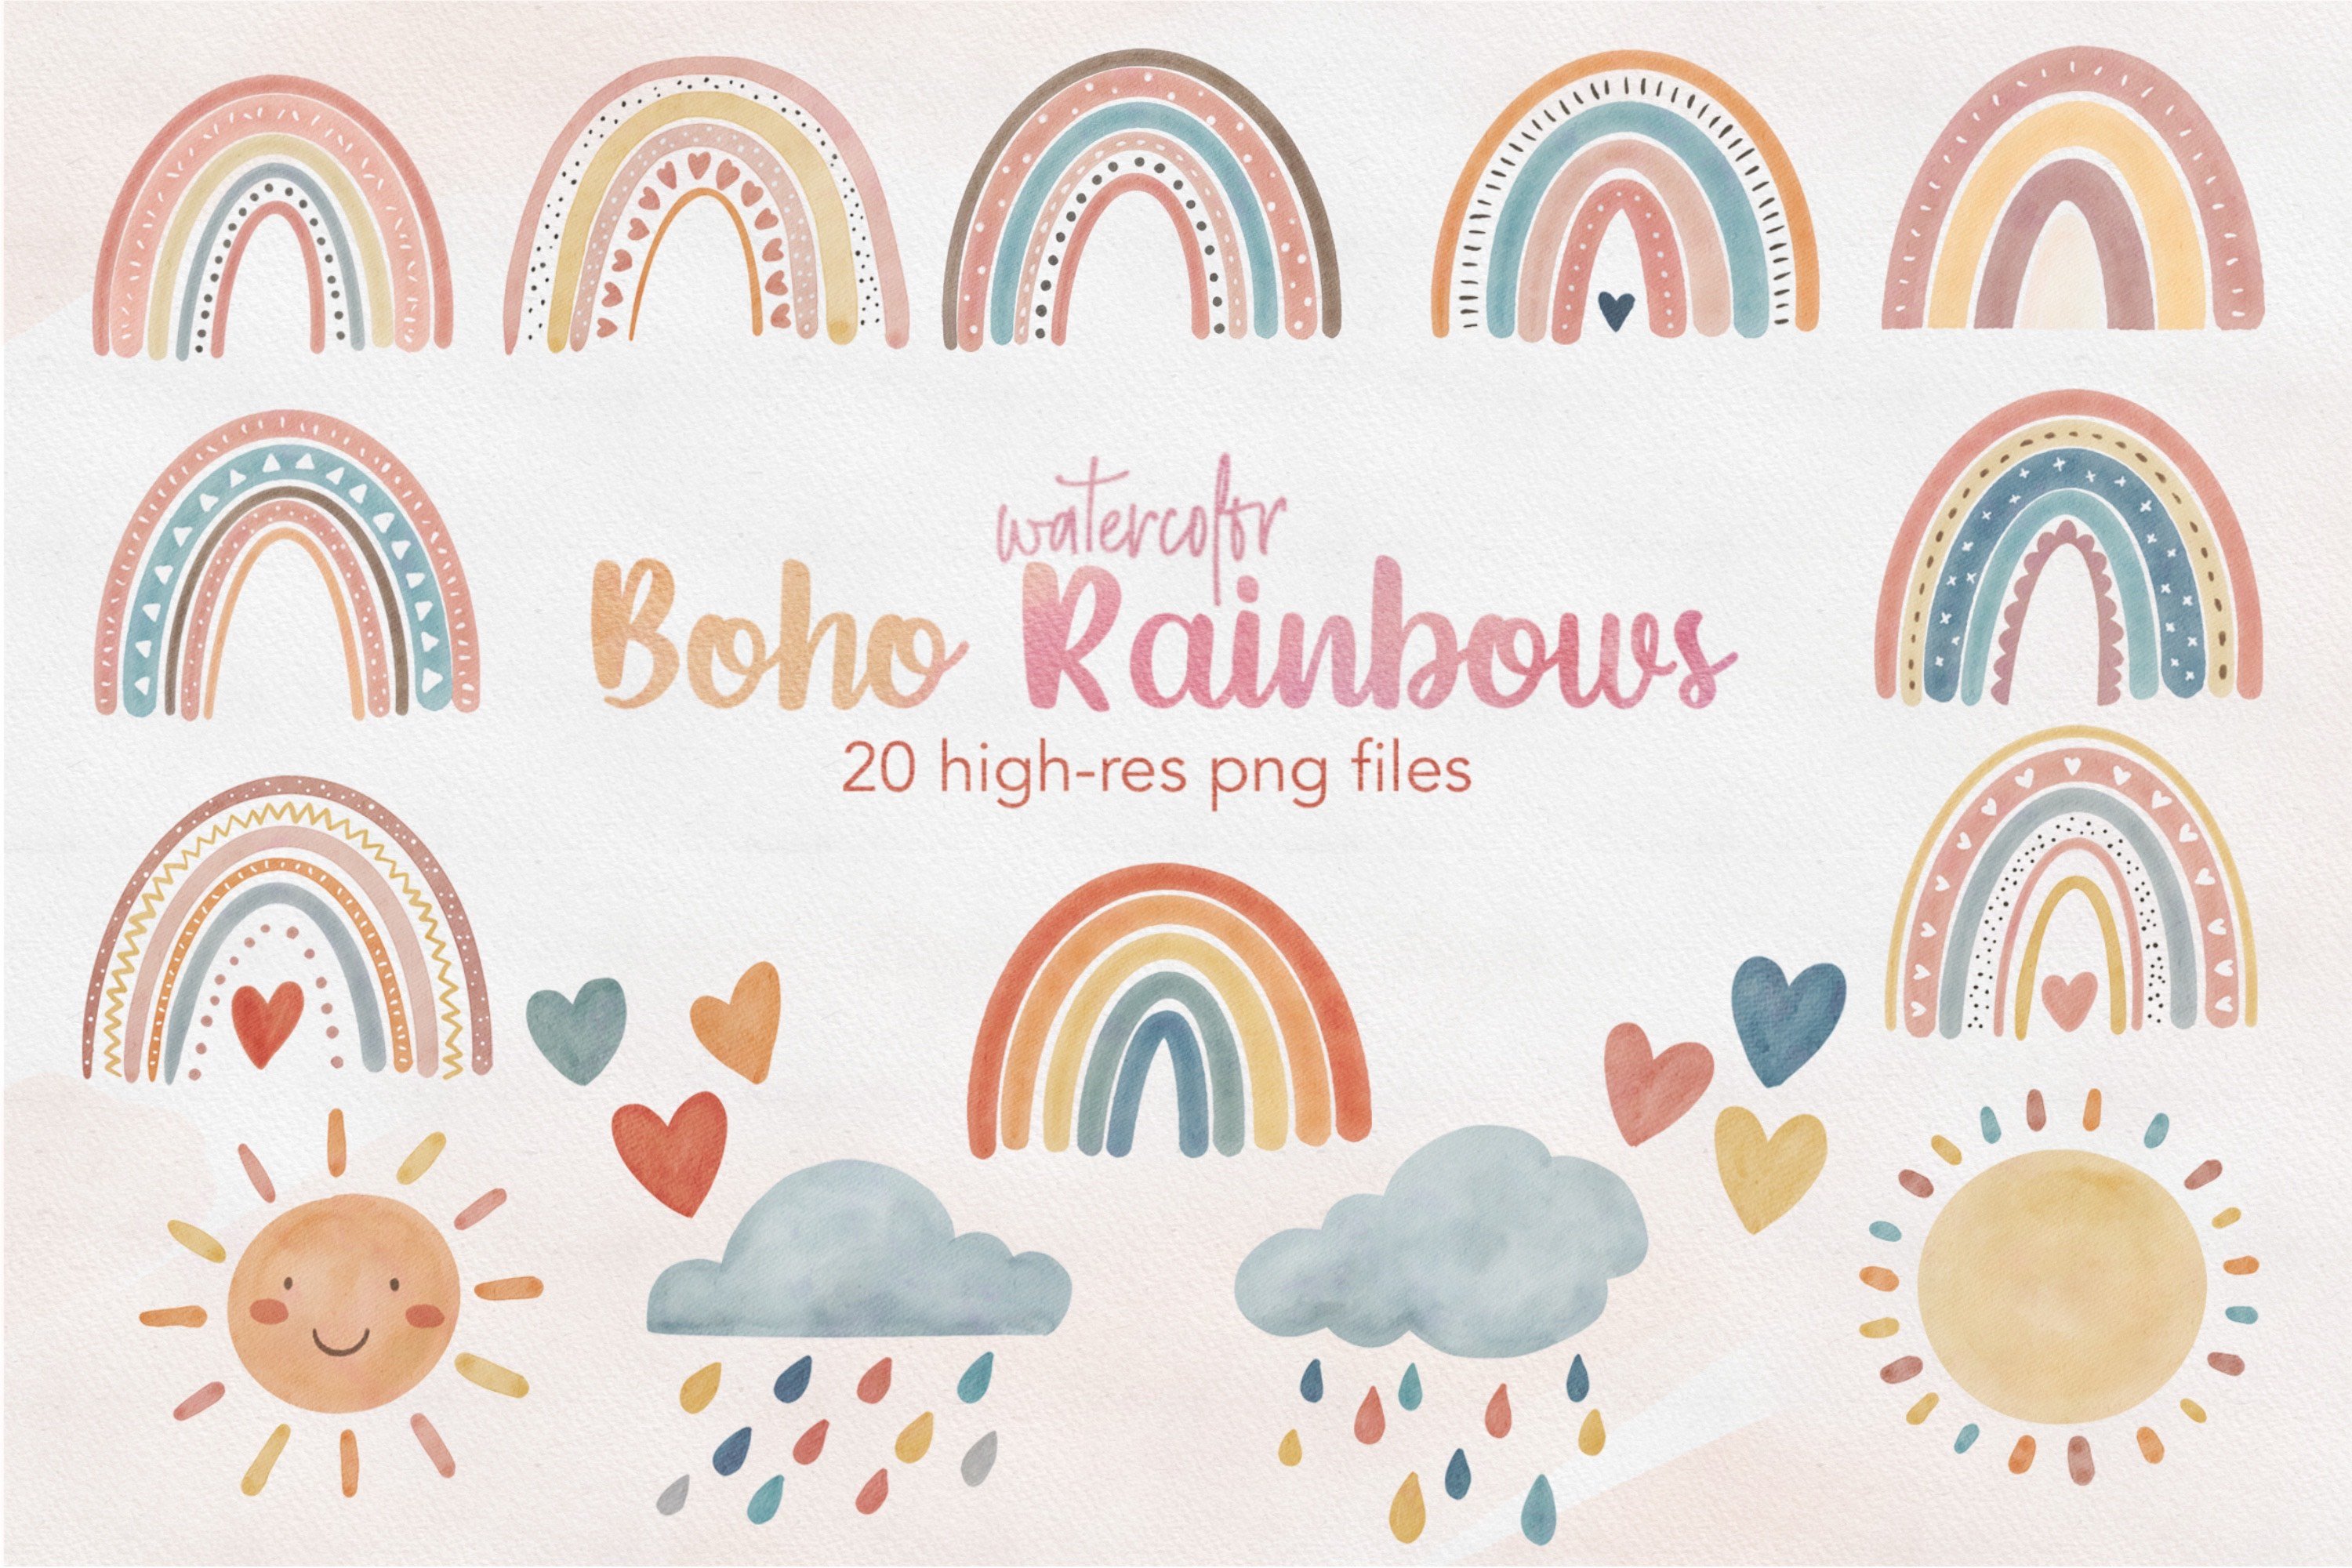 Watercolor Boho Rainbow Clipart png cover image.